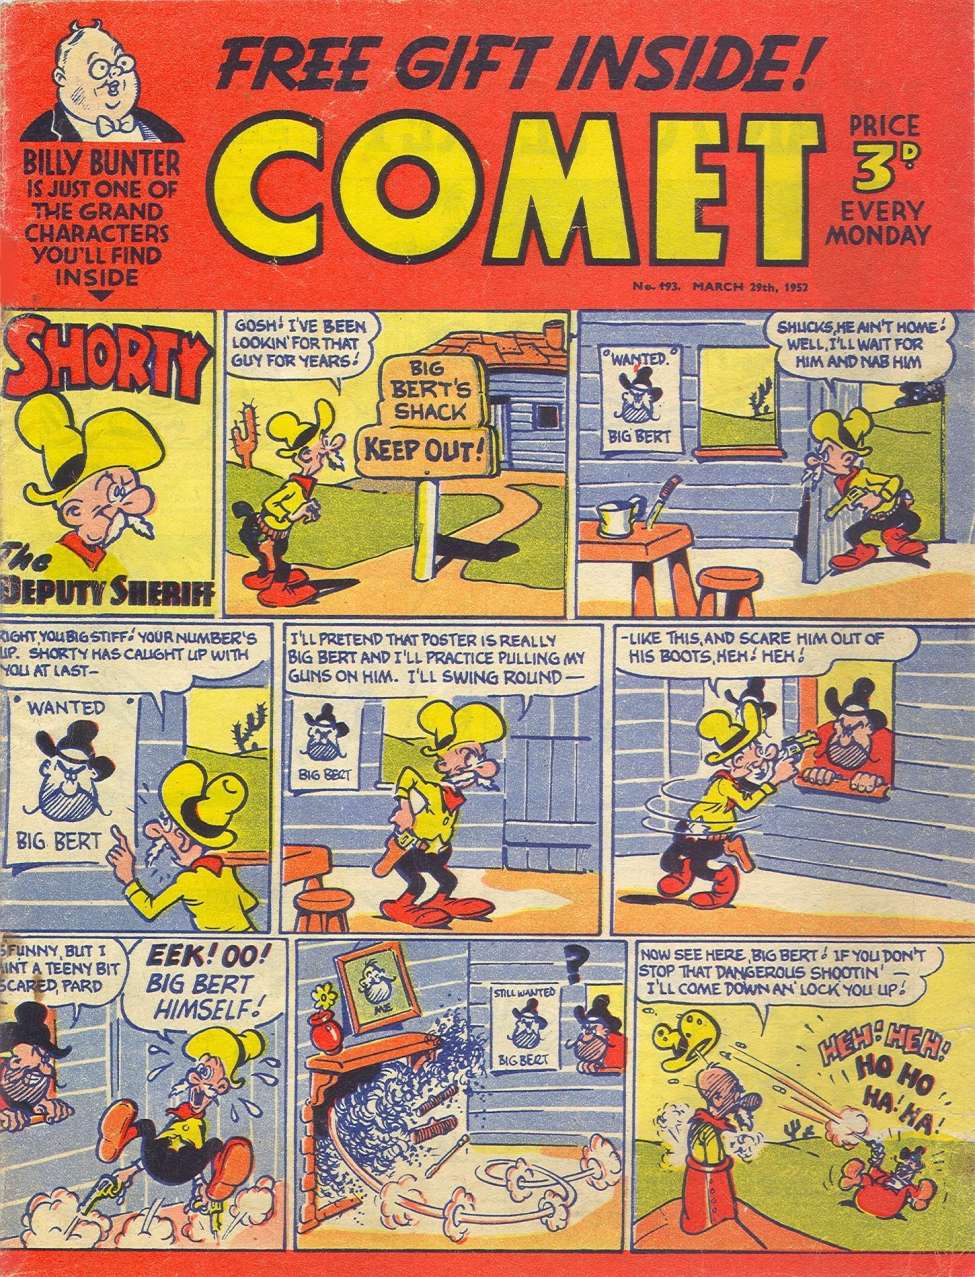 Comic Book Cover For The Comet 193